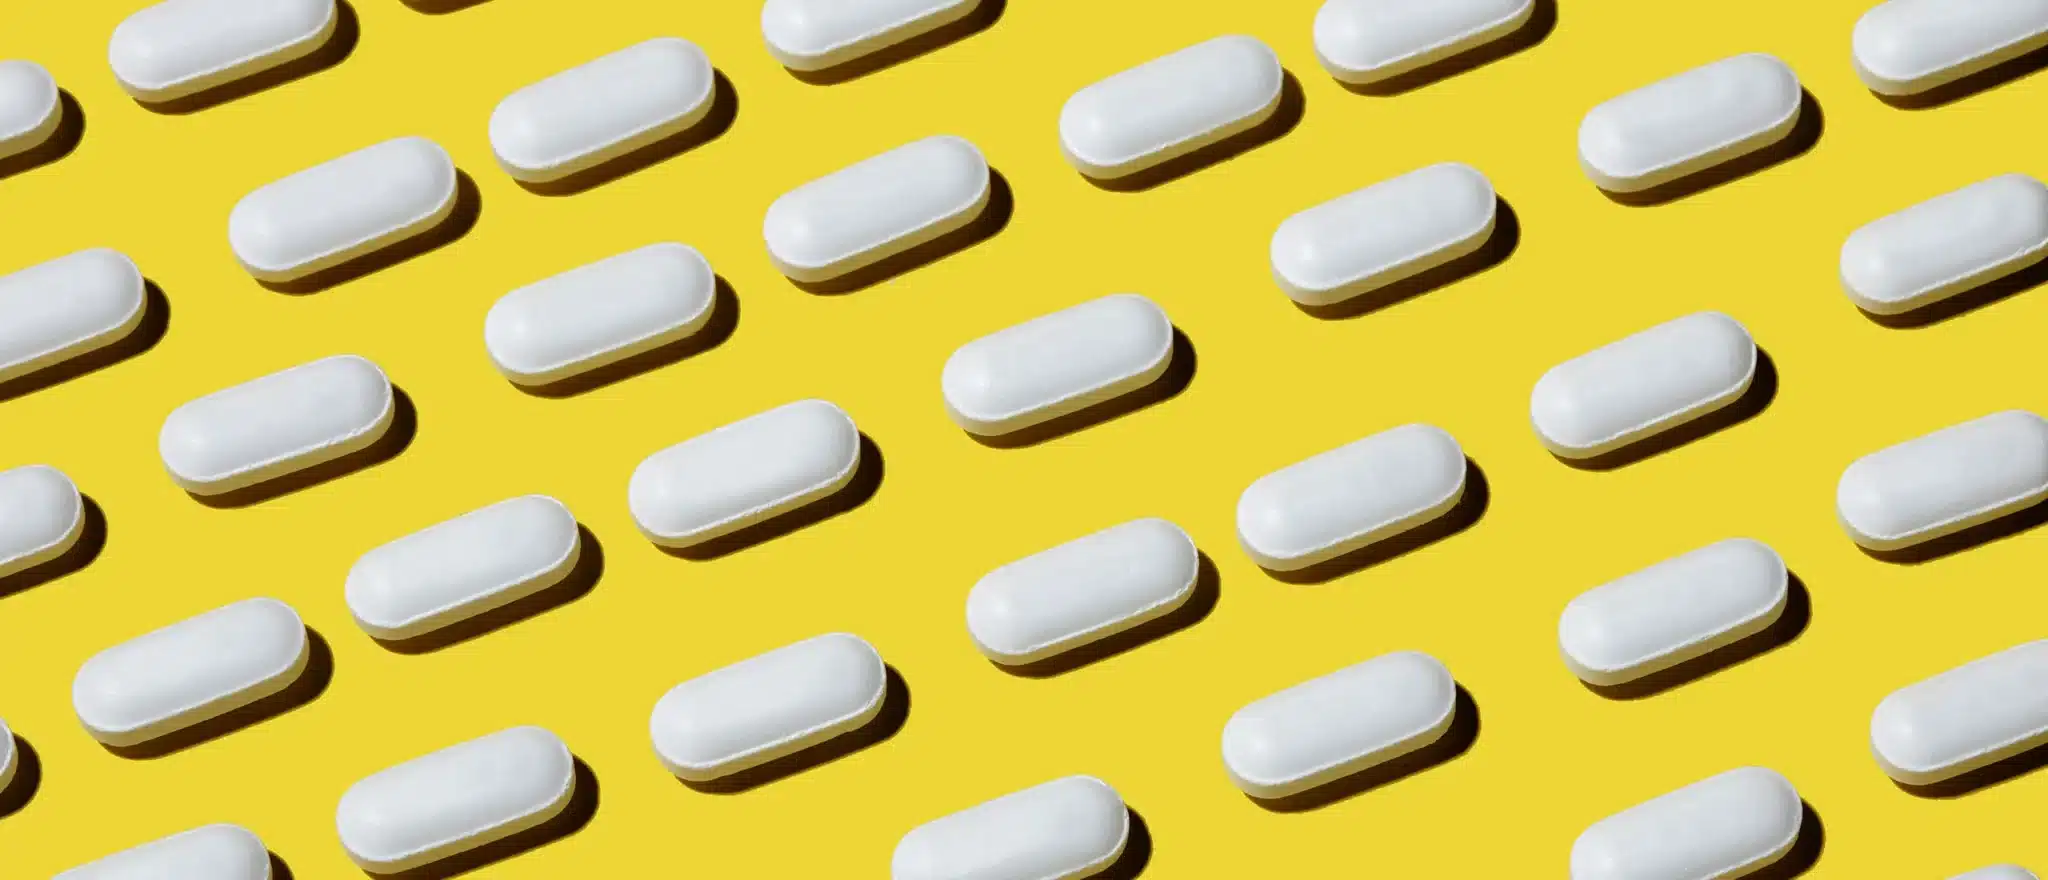 Metformin Could Benefit Your Health, Even If You Don’t Have Diabetes